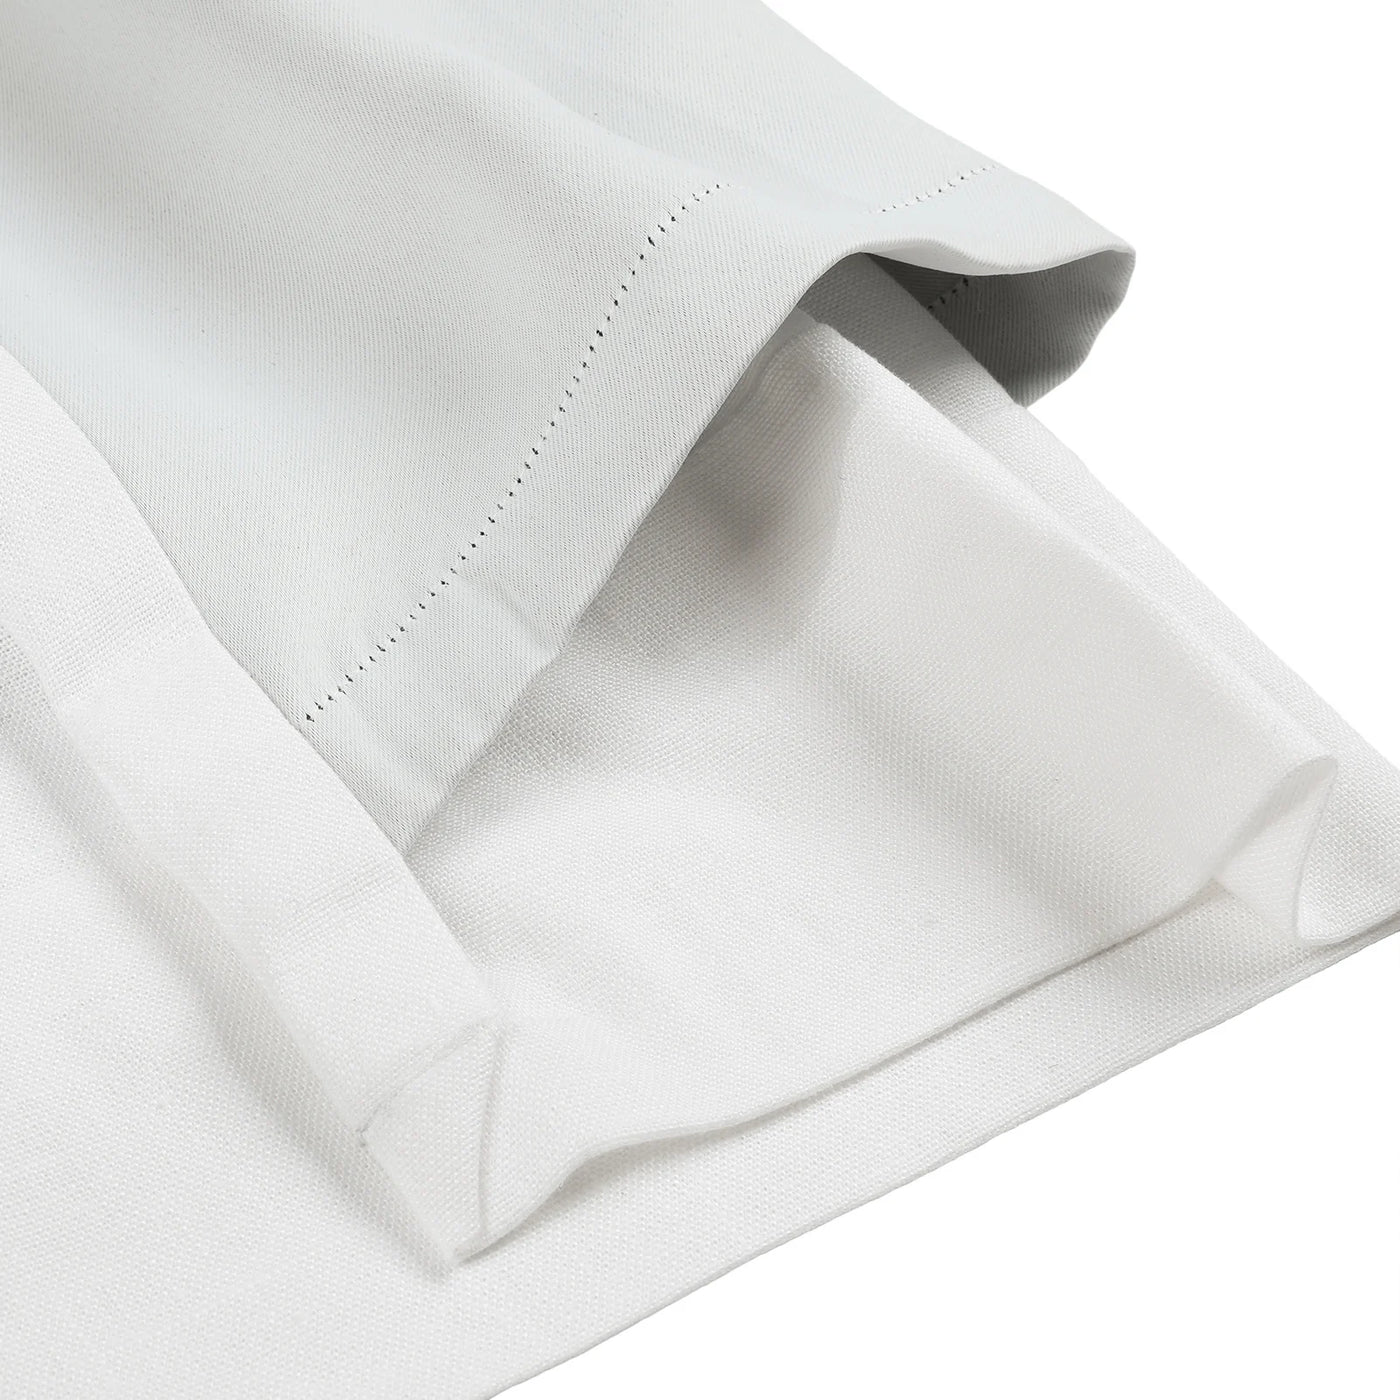 Jawara Linen Cotton Drapery Grommet with Blackout Lining